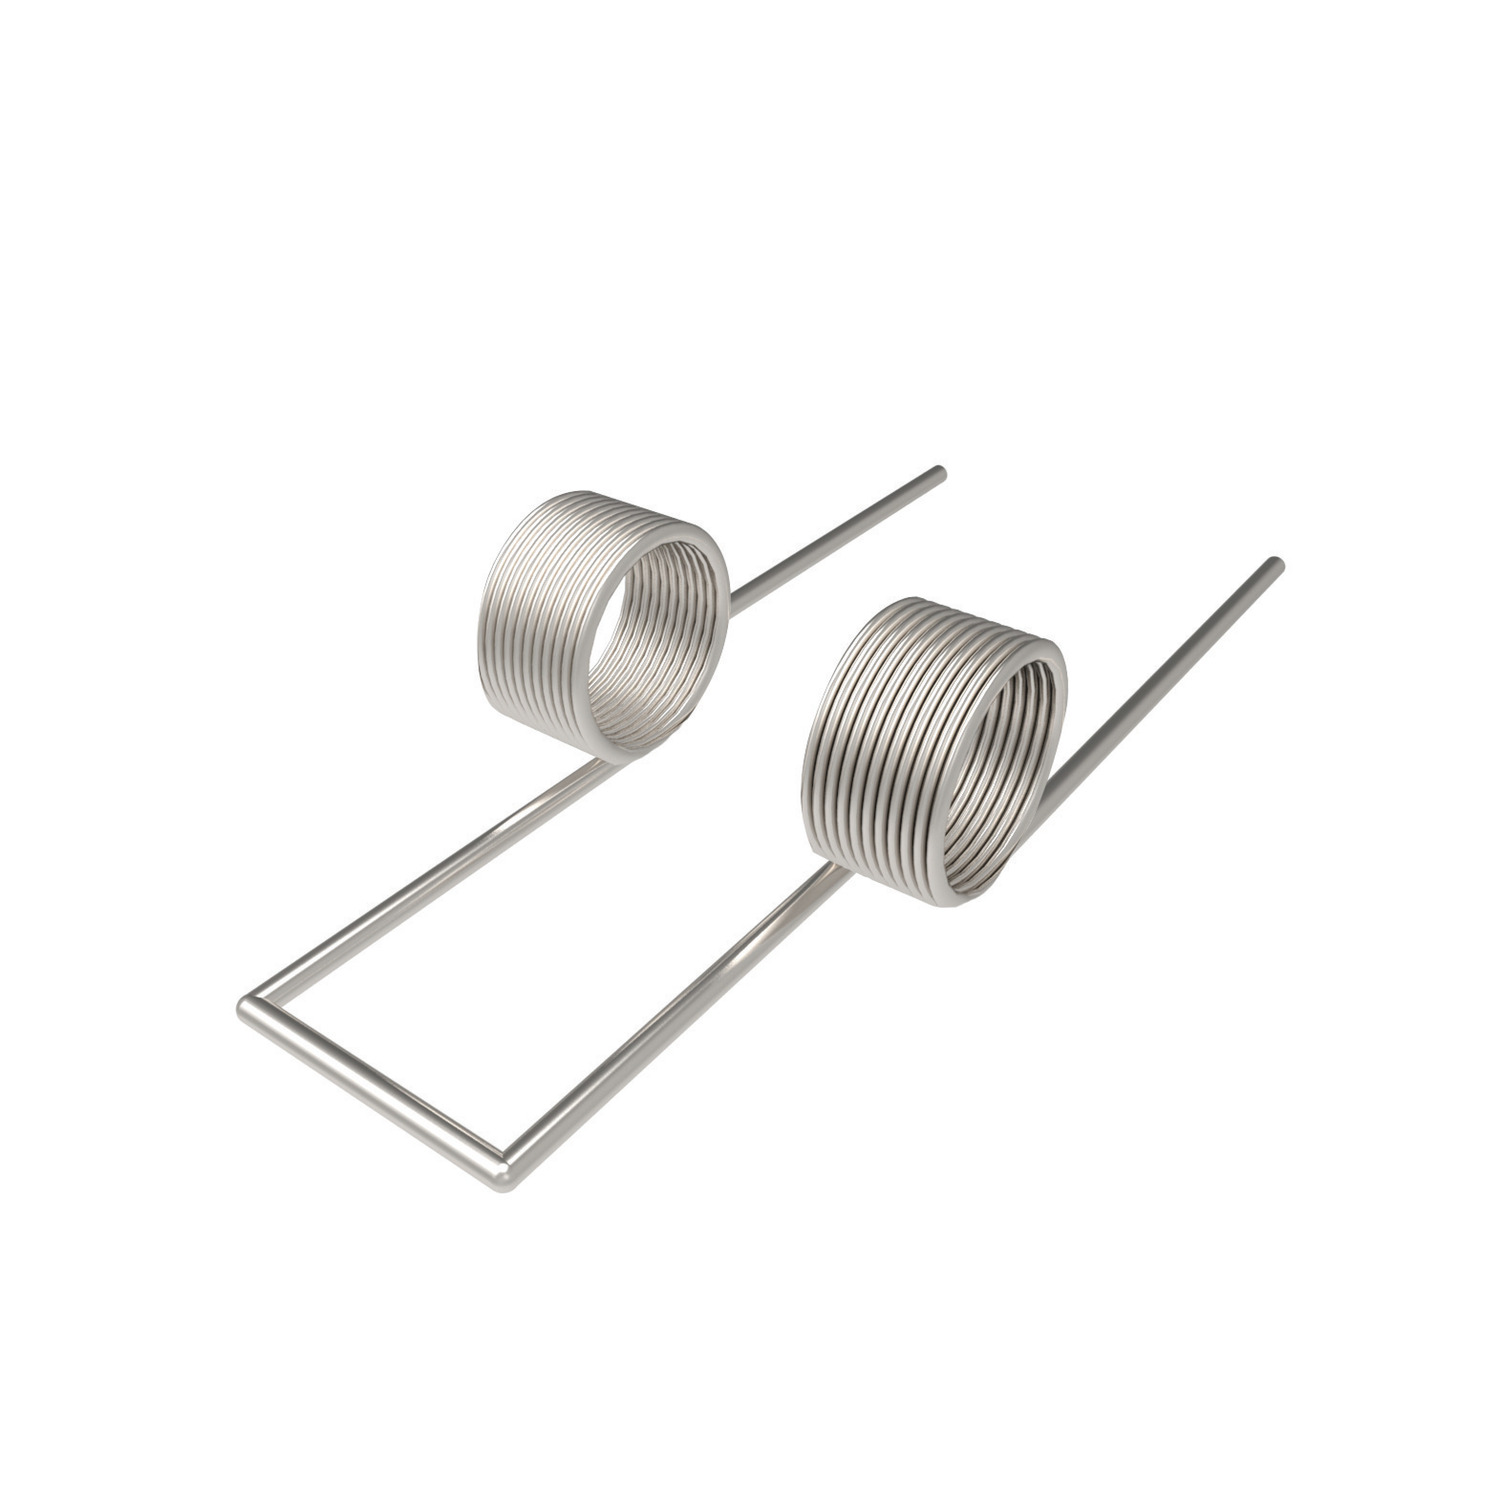 P1312 - Double Torsion Springs stainless